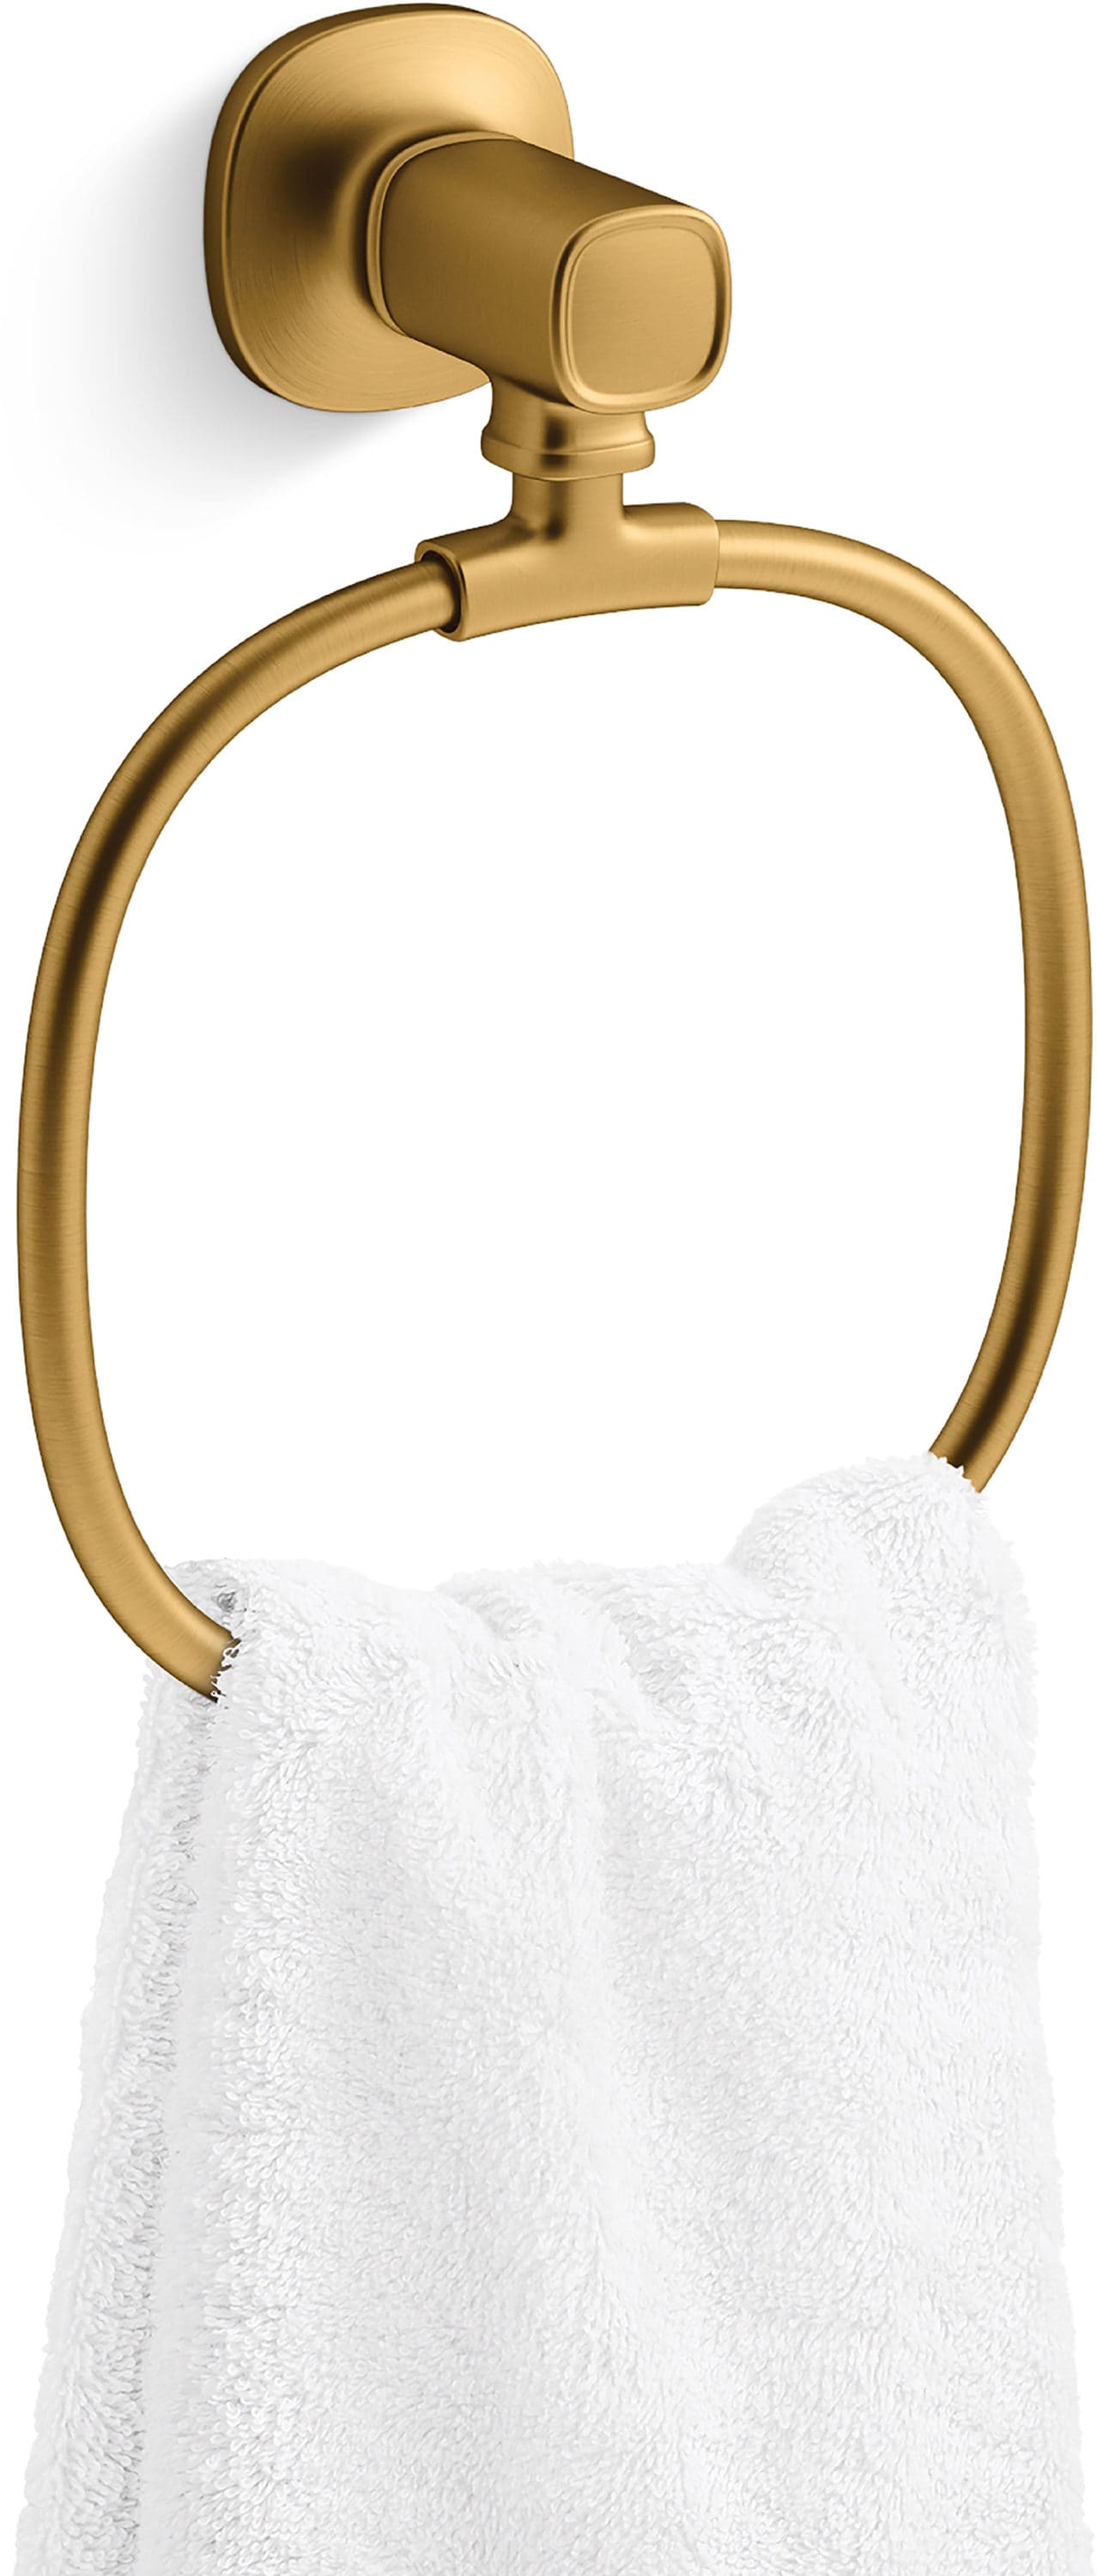 Antique Brass Surface Treatment Single Design Towel Ring - China